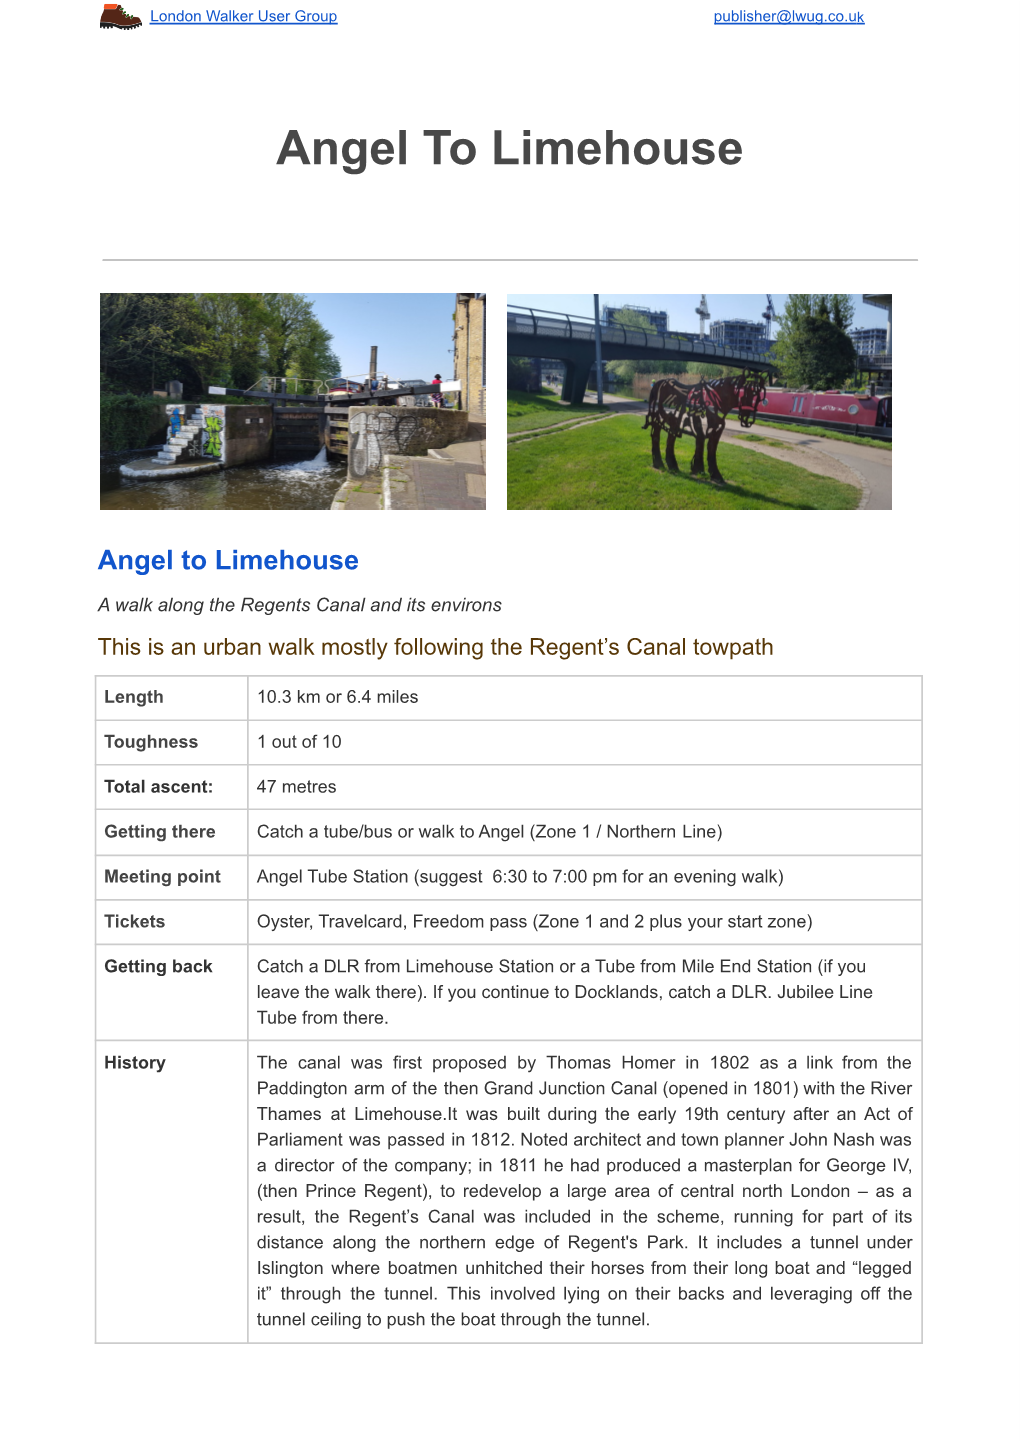 Angel to Limehouse